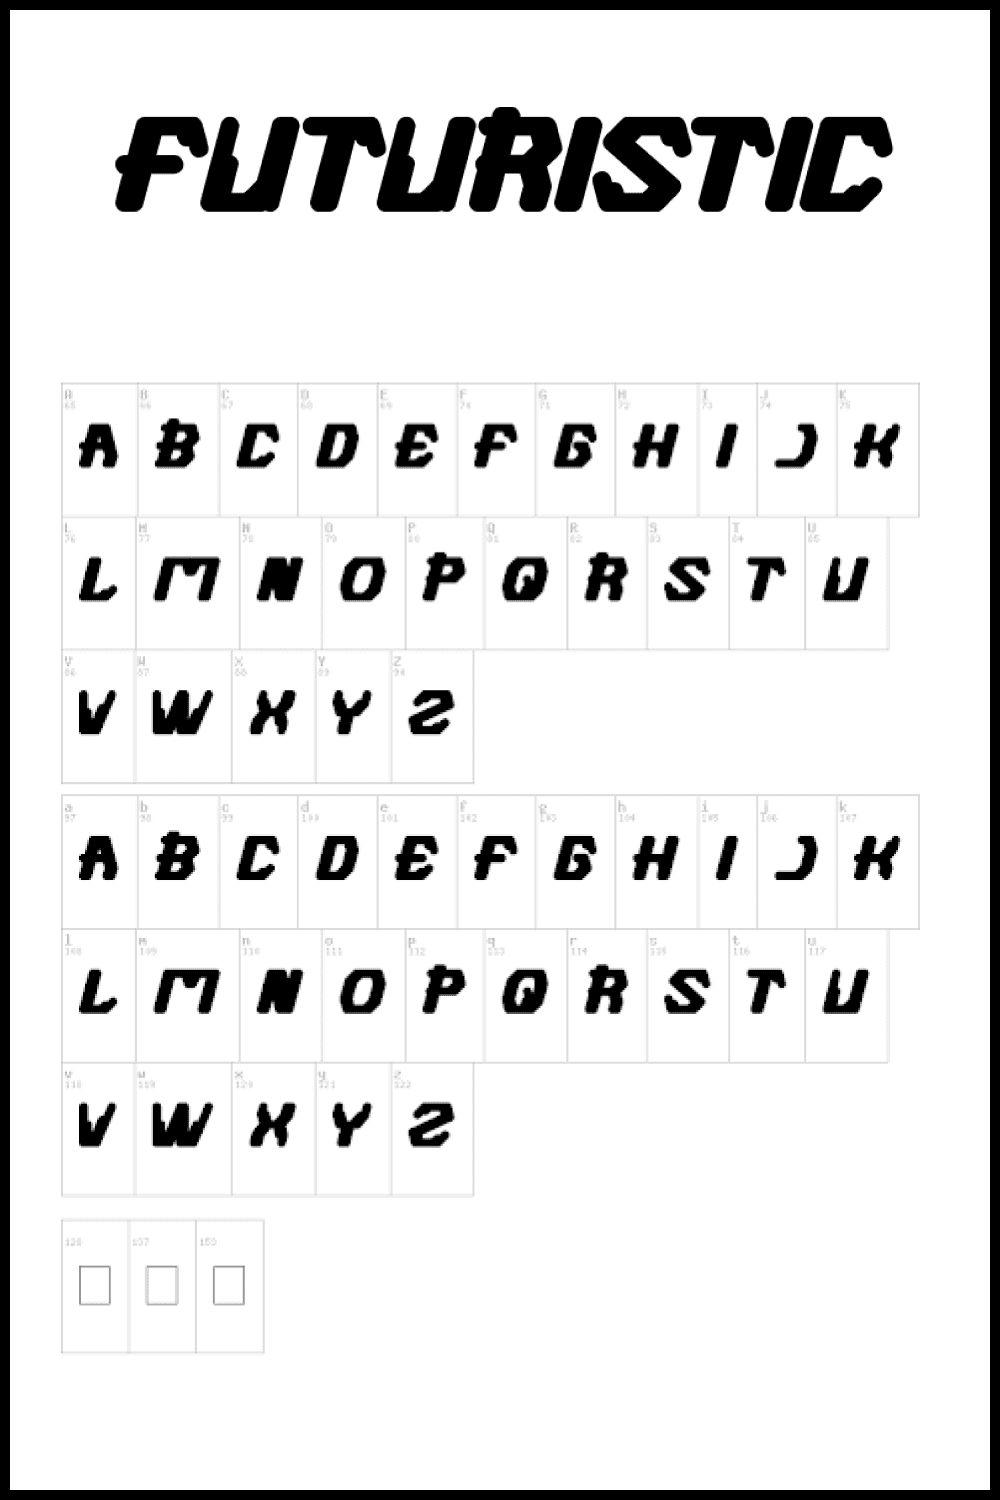 Free font, no straight edges with an interesting design.